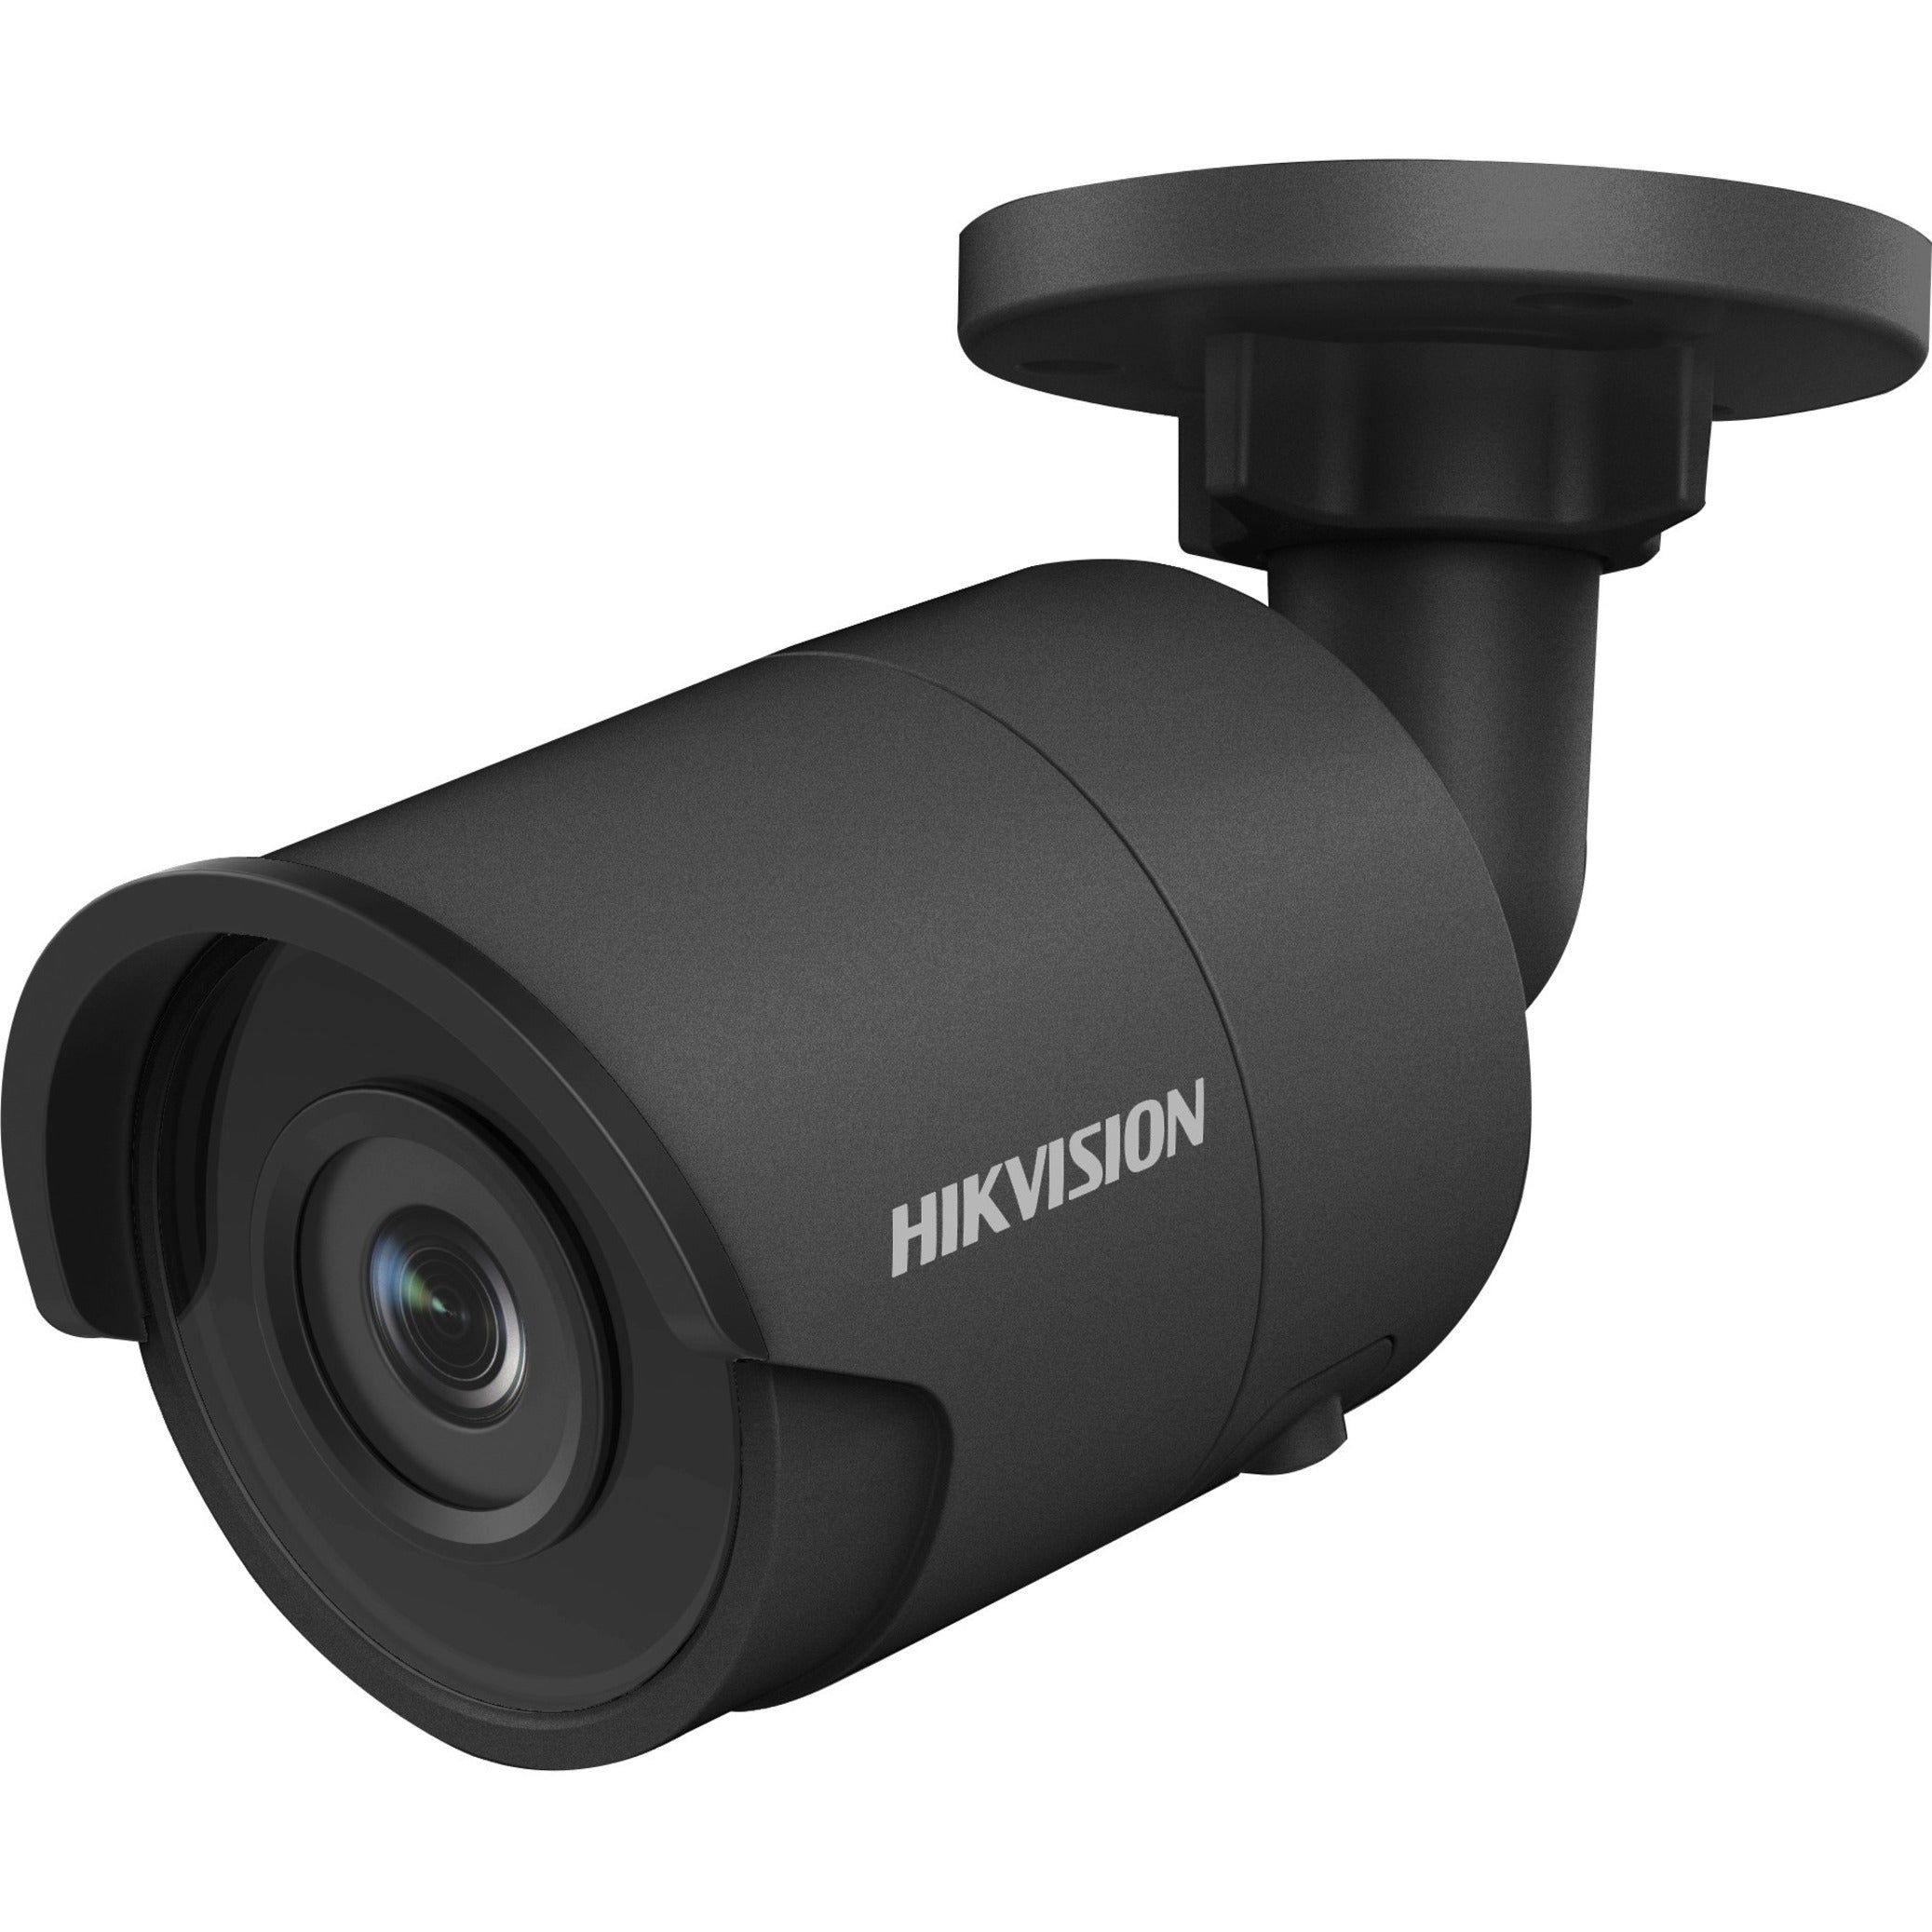 Hikvision DS-2CD2043G0-IB 2.8MM 4 MP IR Fixed Bullet Network Camera, Outdoor, 3 Year Warranty